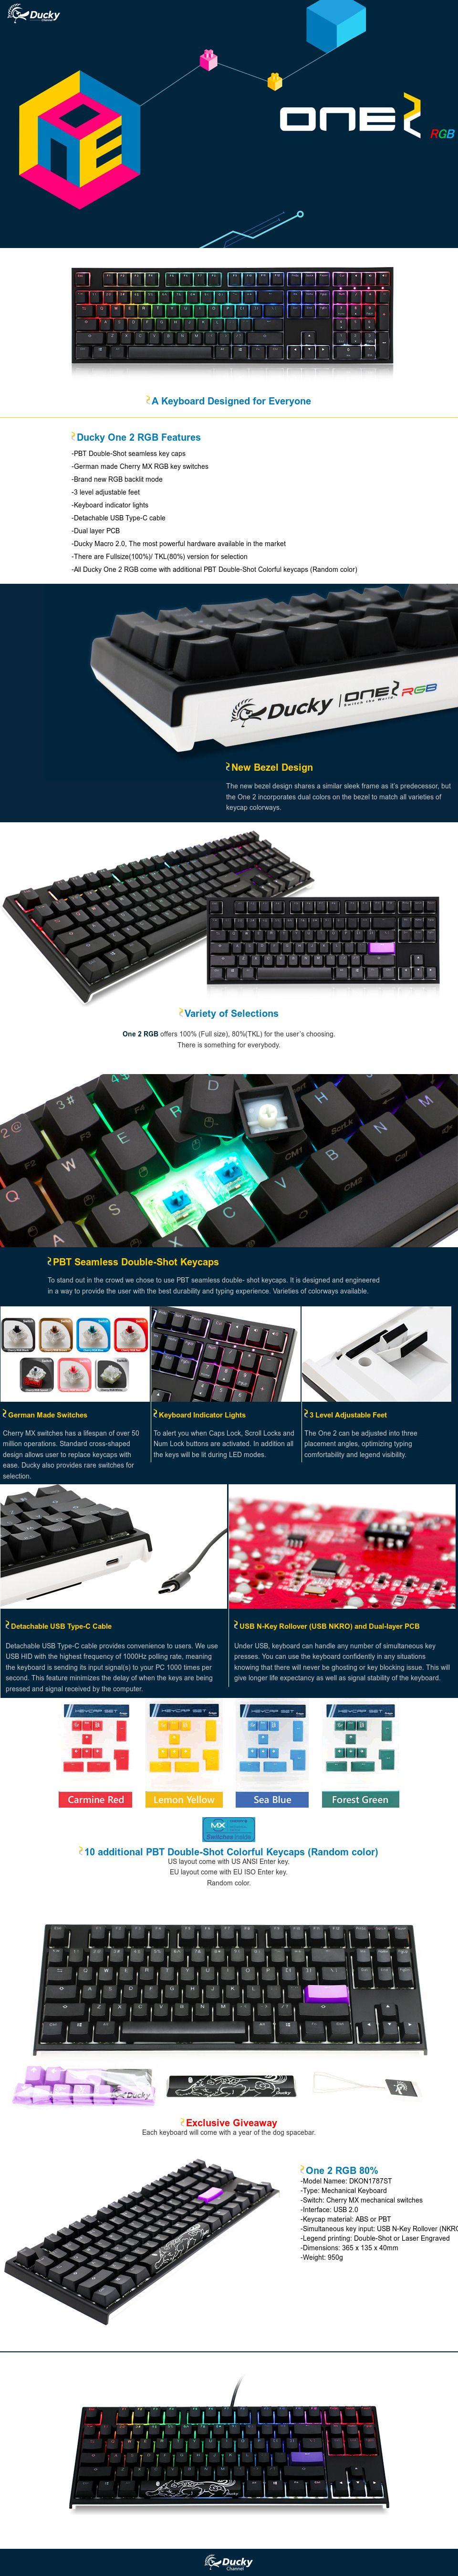 Ducky One 2 RGB TKL Mechanical Keyboard with Cherry MX Silent Red Key Switches